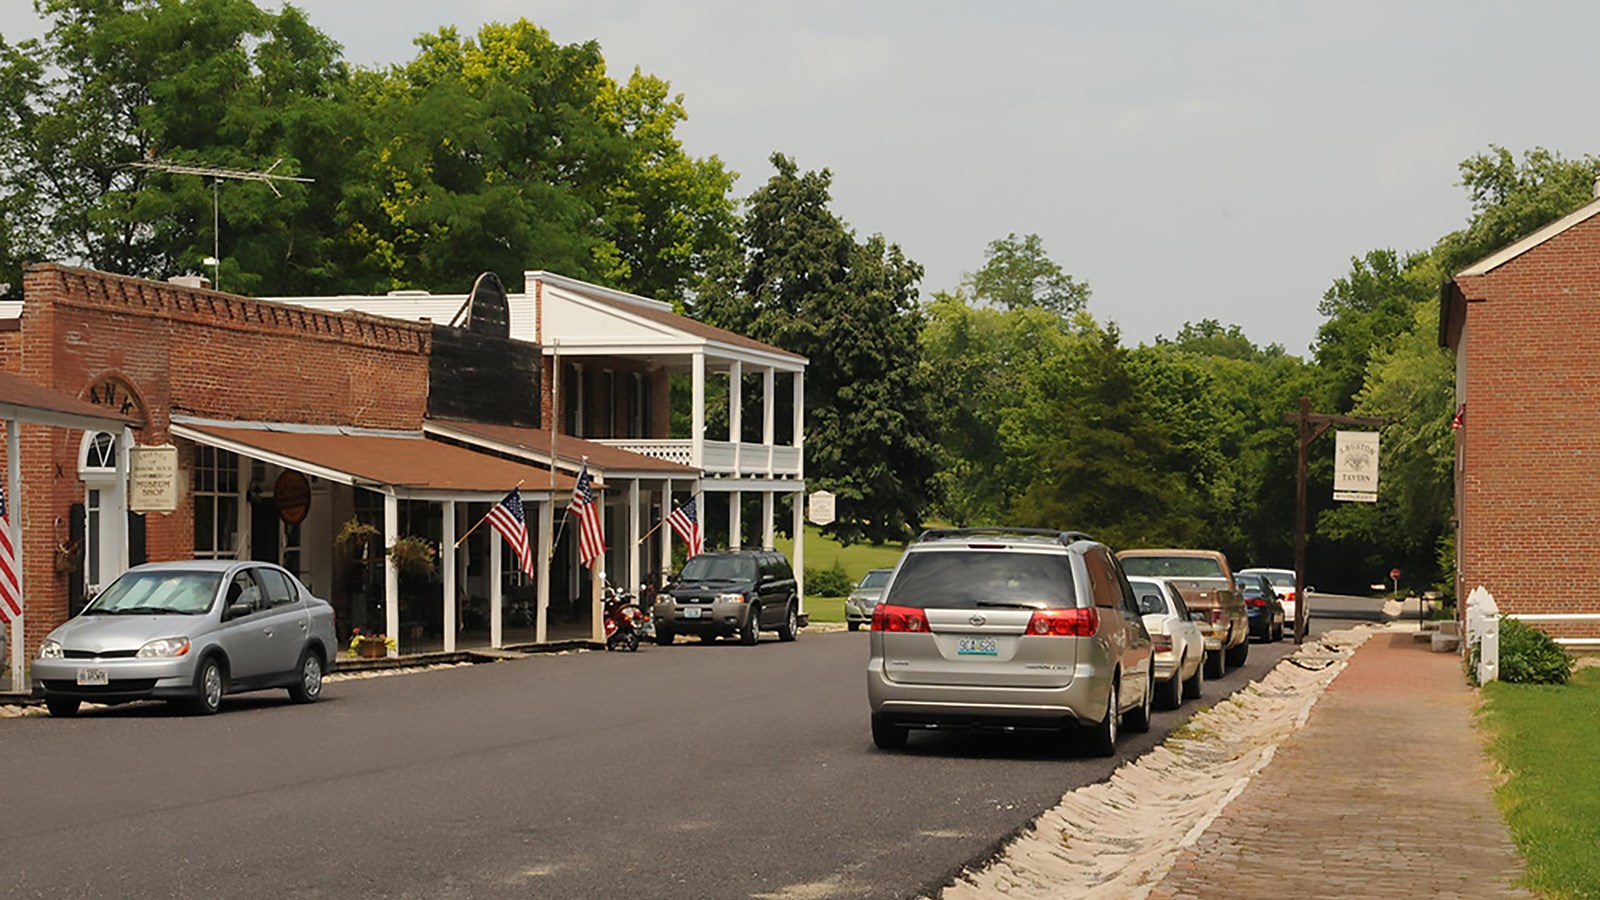 Roadway with two-story storefronts on either side